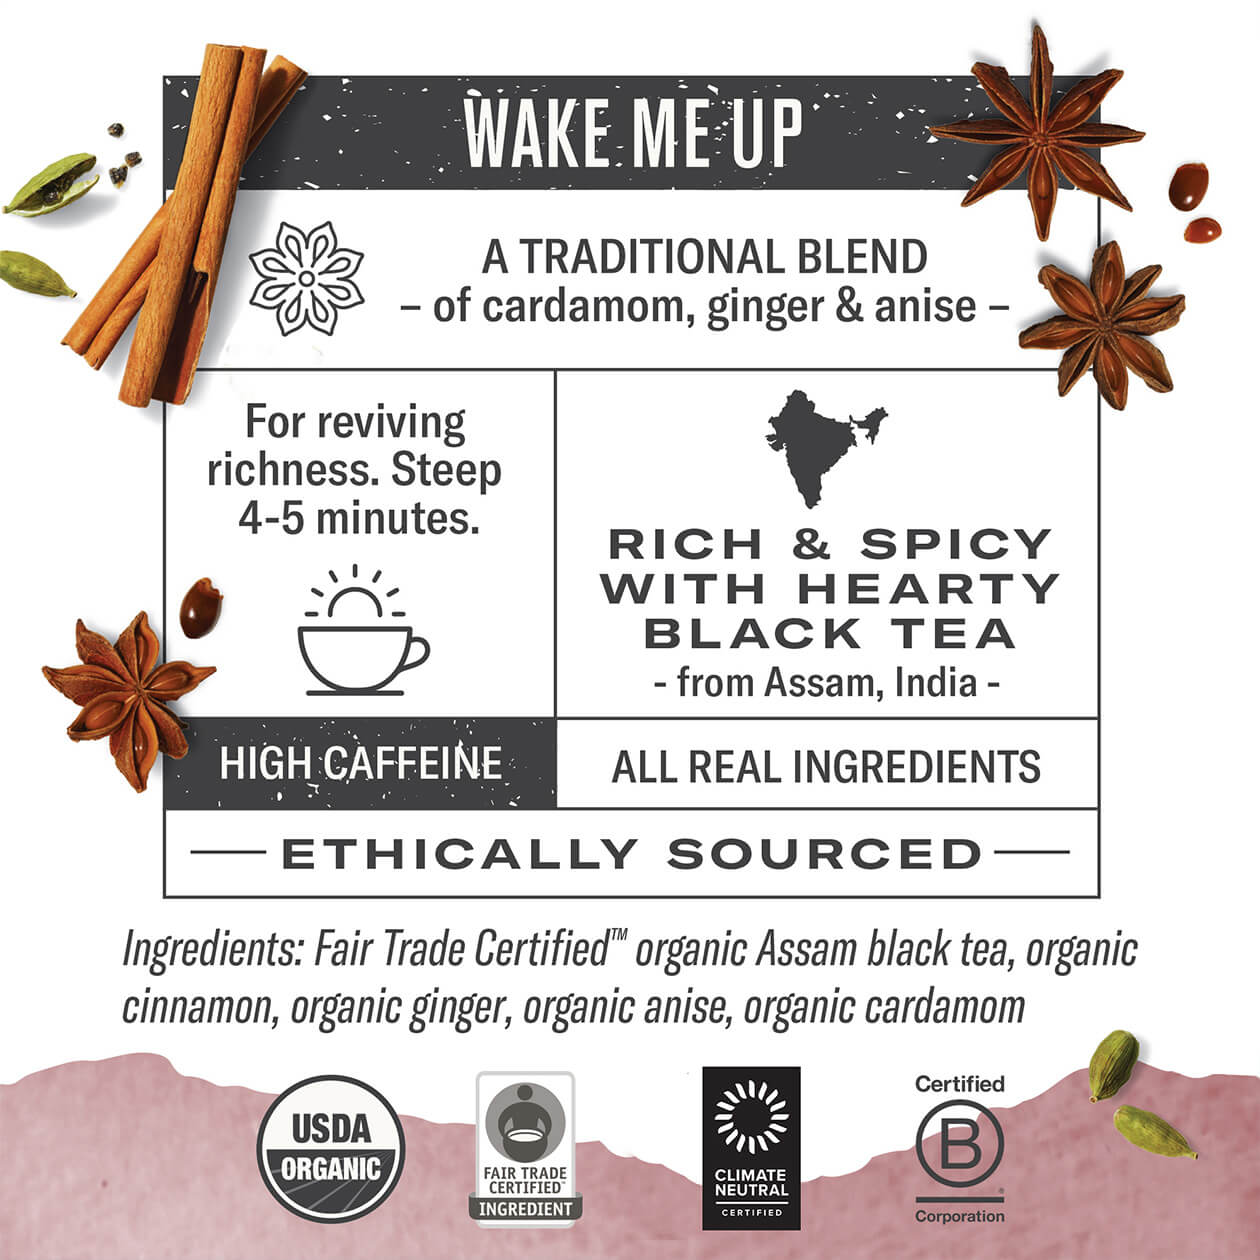 Infographic about Golden Chai: steep 4-5 minutes, origin: Assam India, high caffeine, all real ingredients, ethically sourced